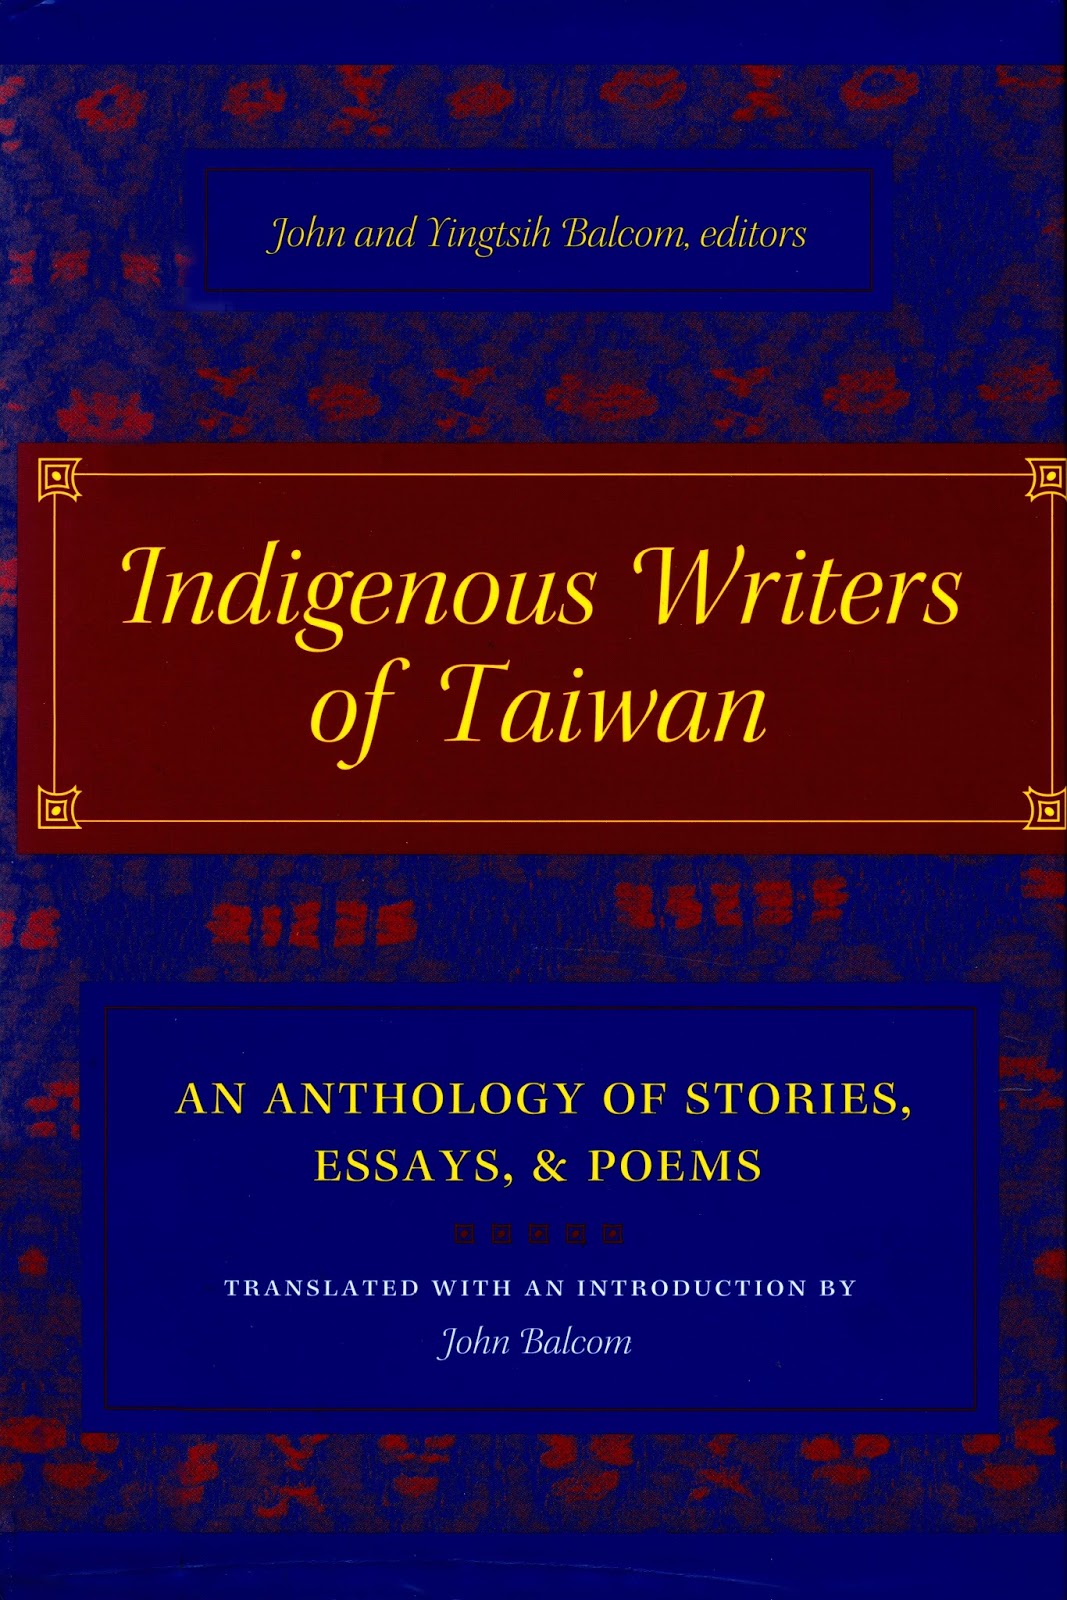 Indigenous Writers of Taiwan : An Anthology of Stories, Essays, & Poems（2005）